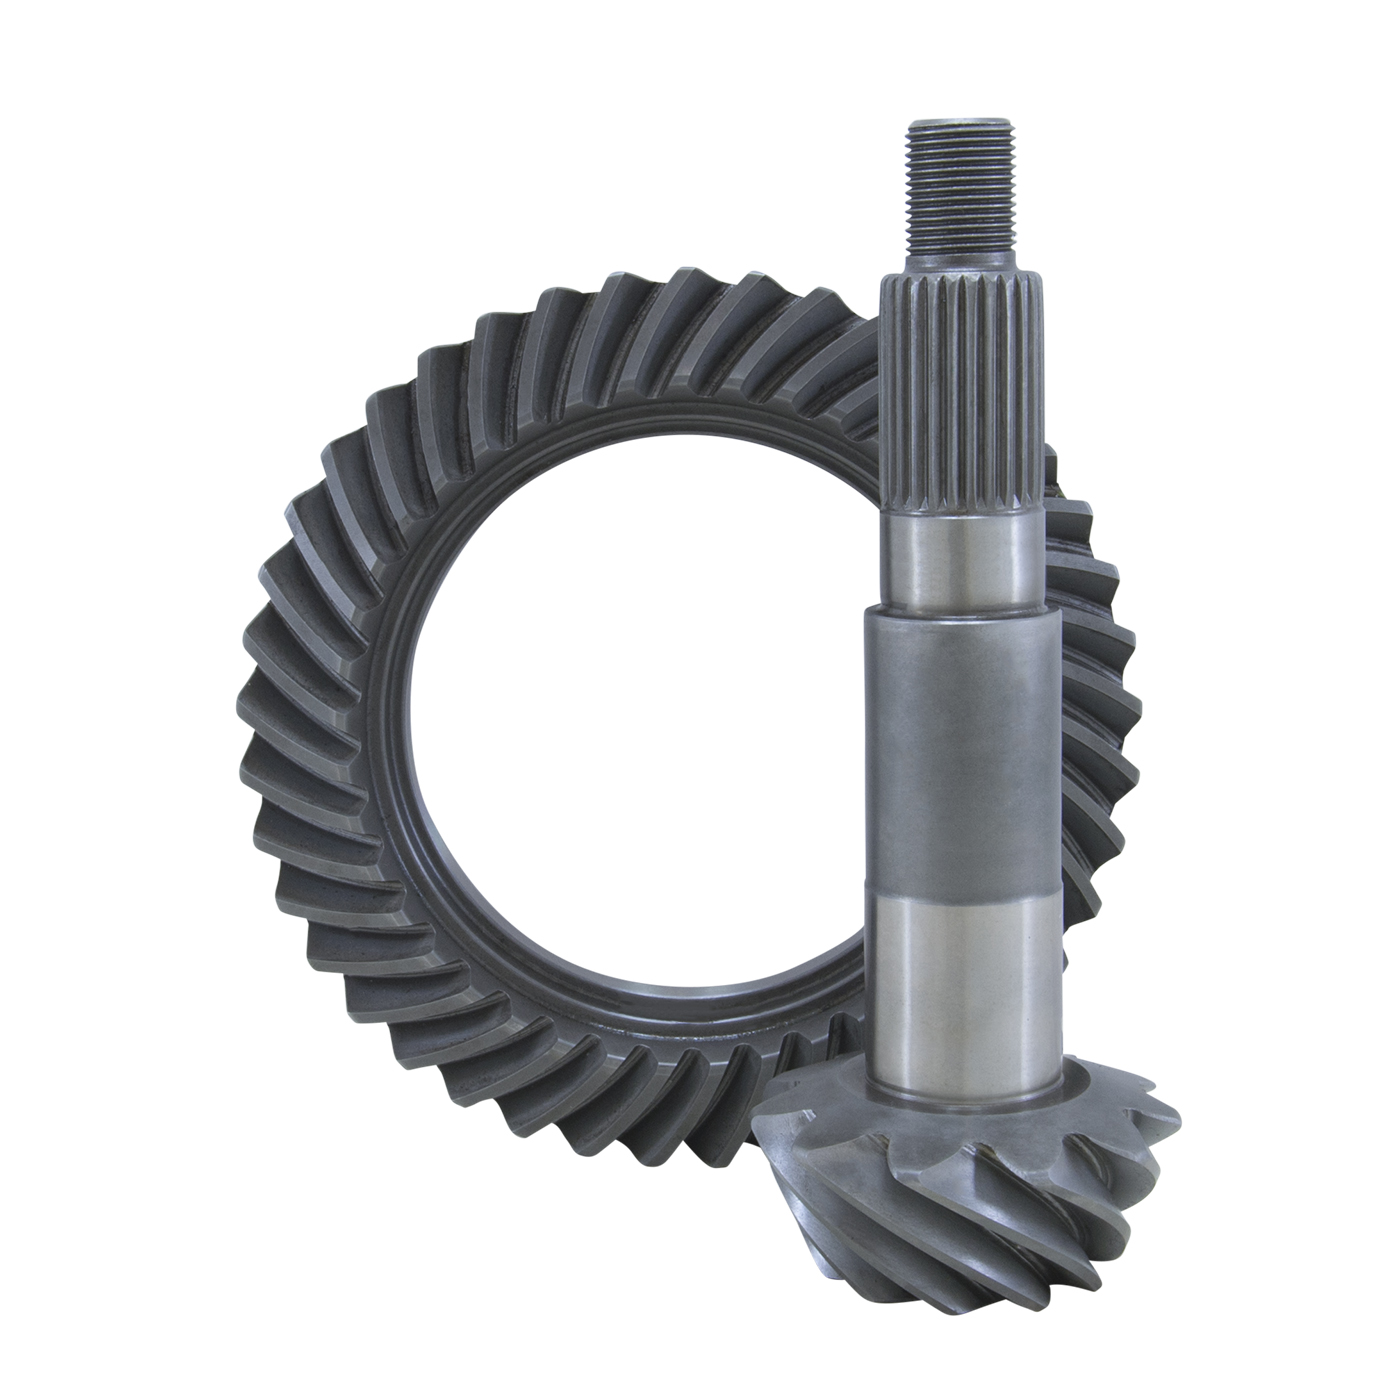 USA Standard Ring & Pinion replacement gear set for Dana 30 in a 3.54 ratio